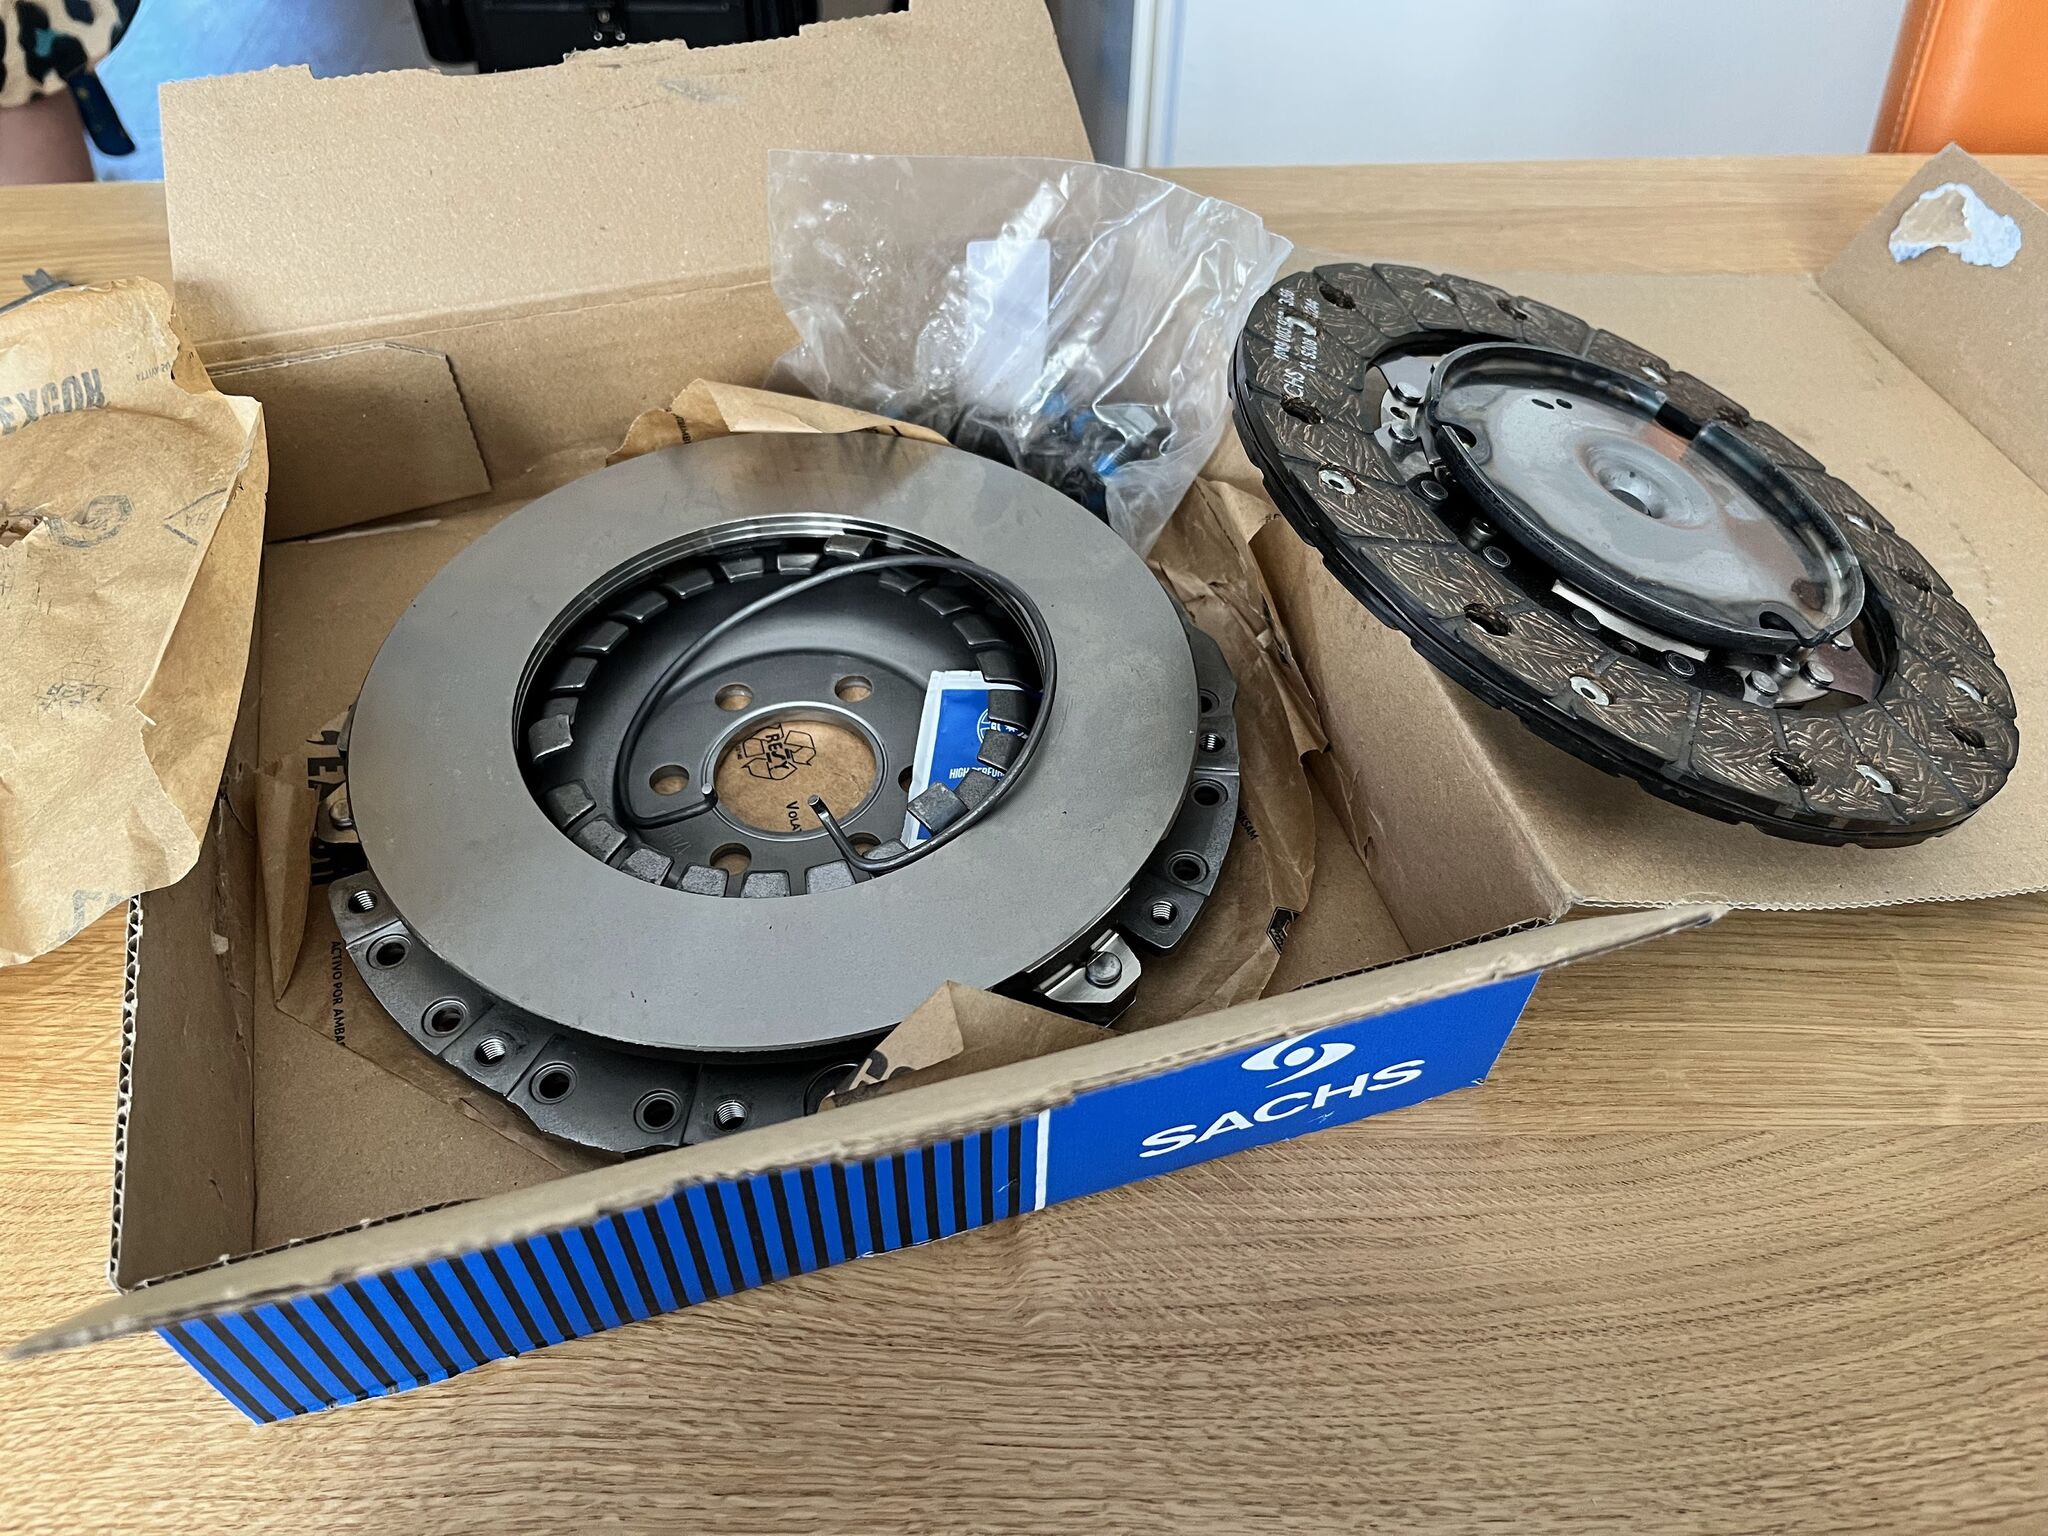 The new, ready to be installed.